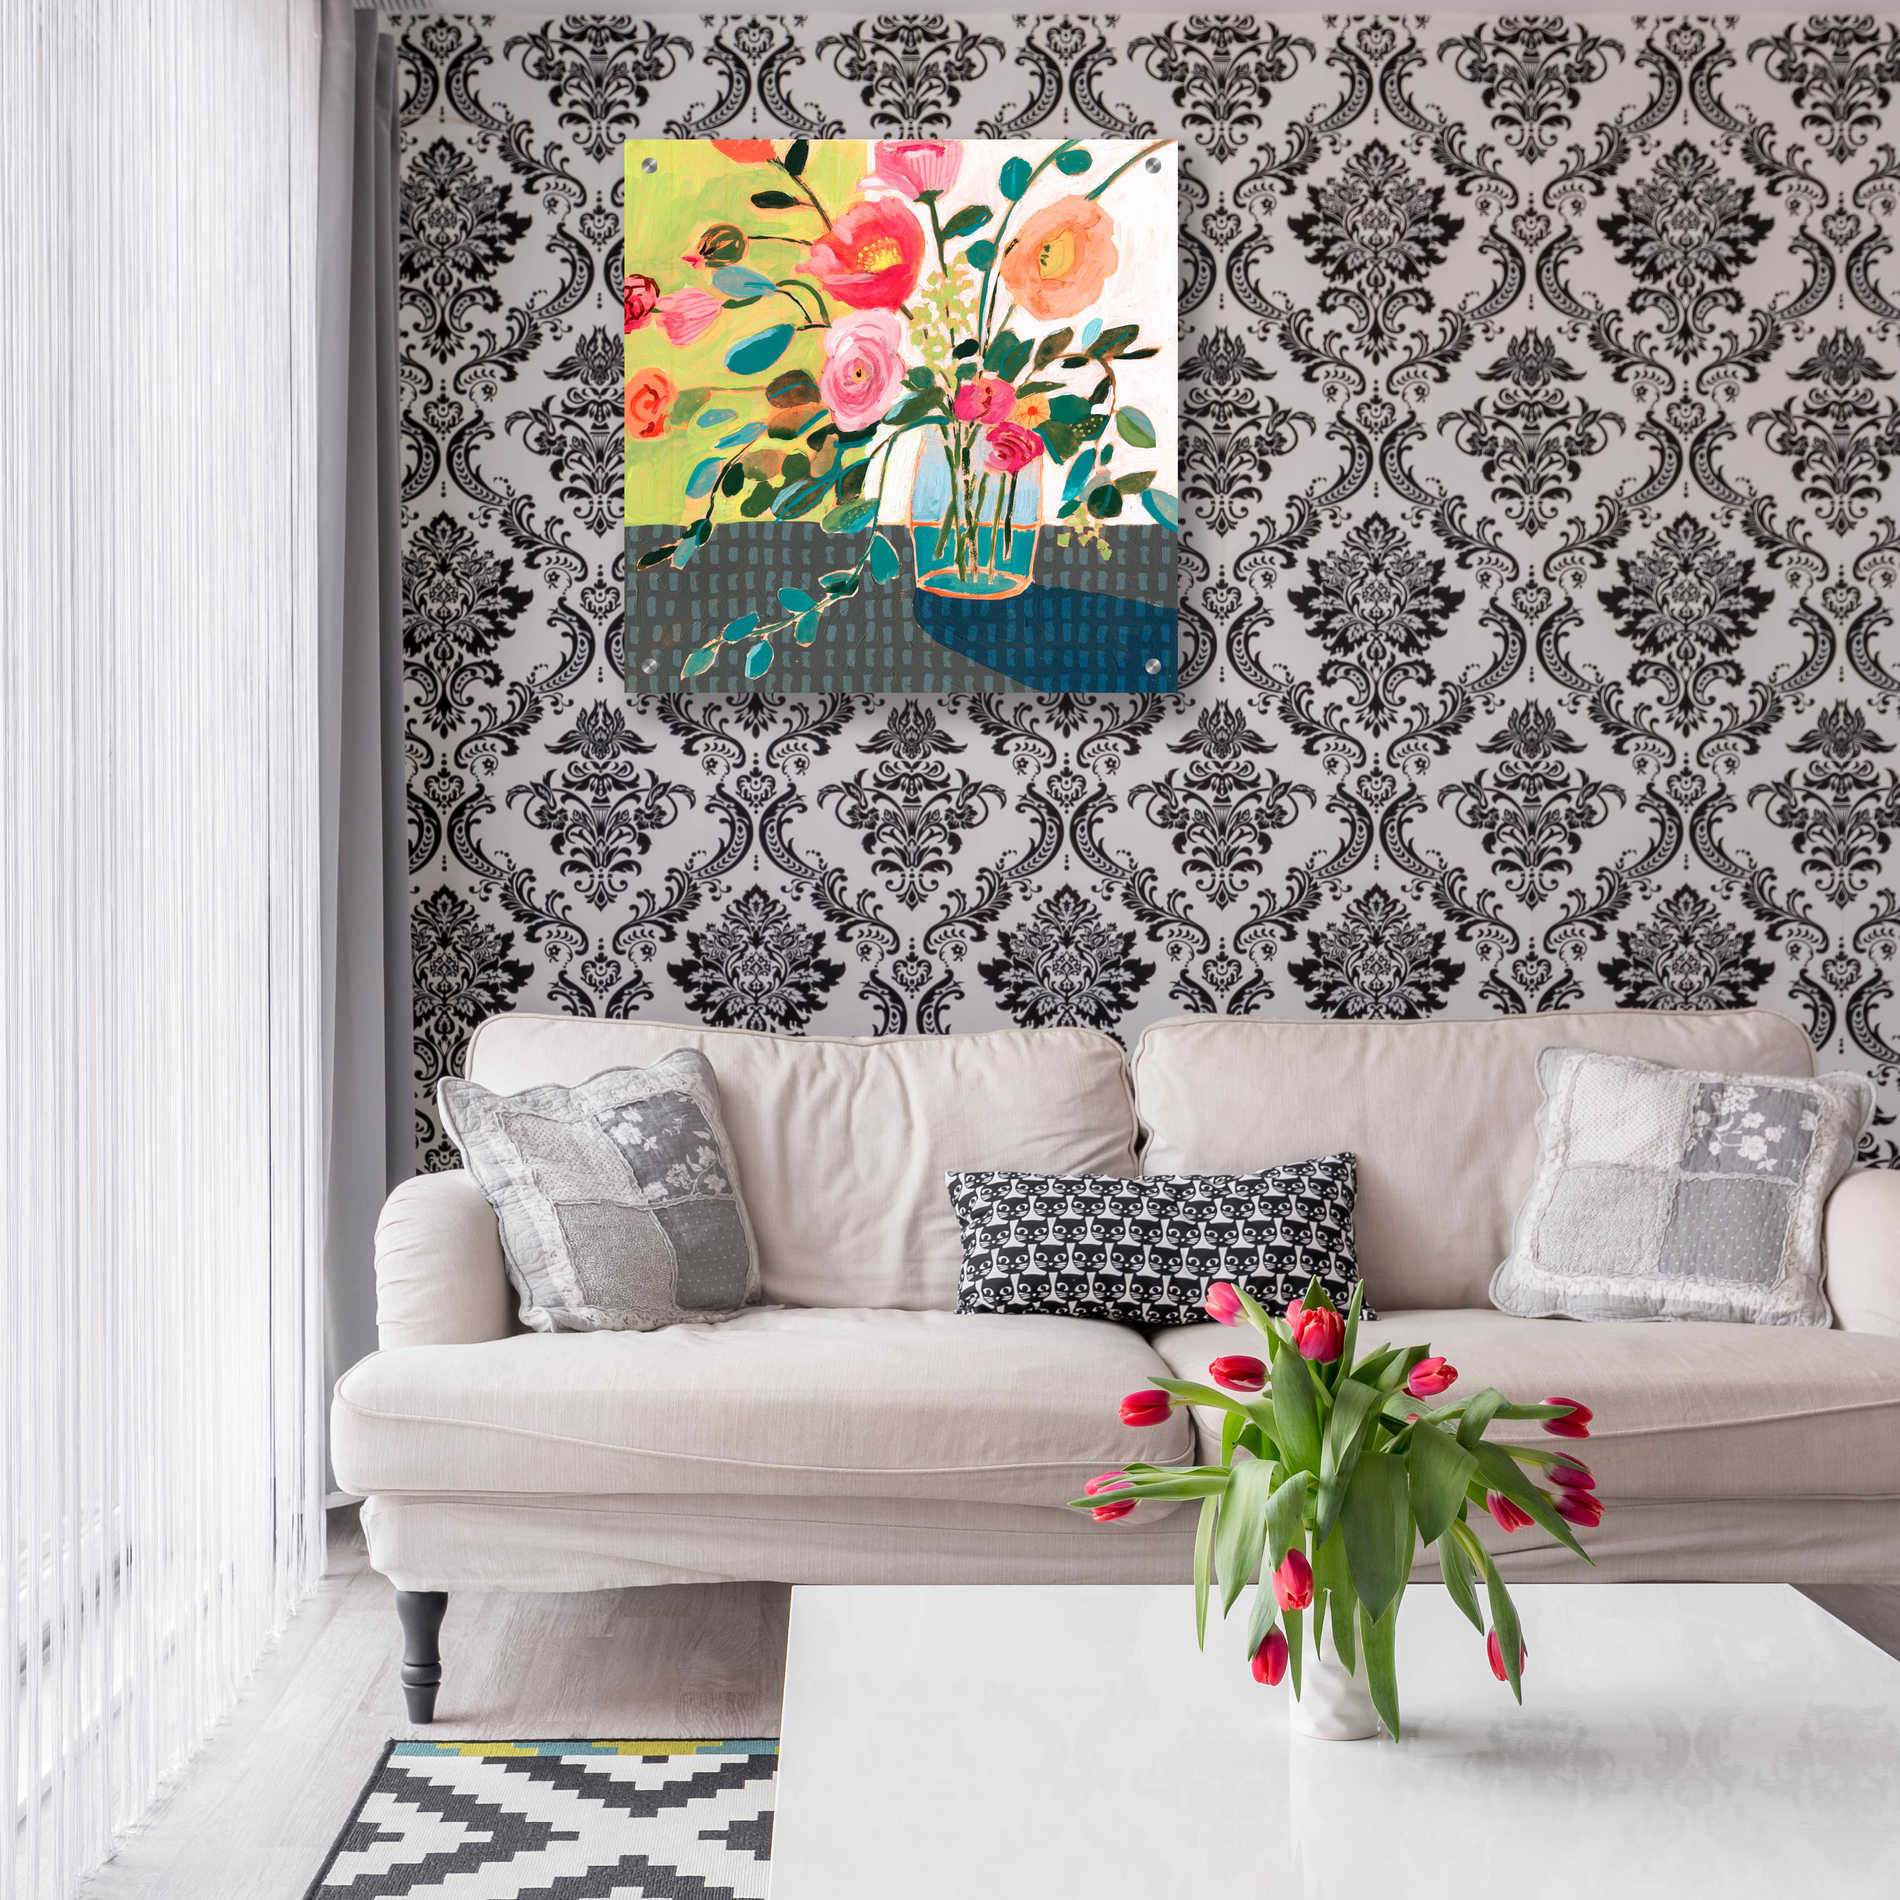 Epic Art 'Quirky Bouquet II' by Victoria Borges, Acrylic Wall Art,24x24